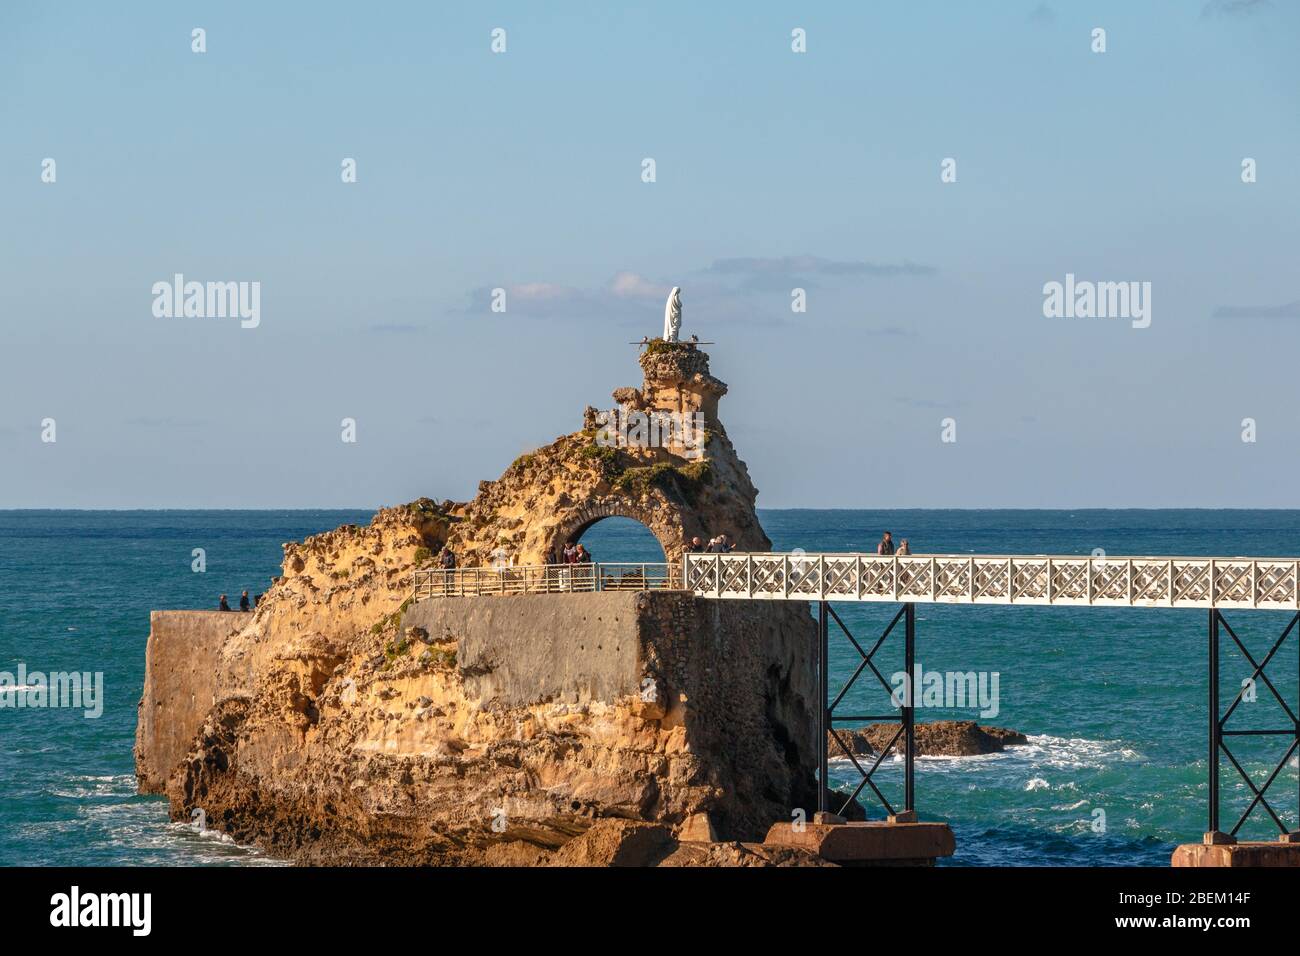 The Rocher de la Vierge / Rock of the Virgin statue of Mary in Biarritz, France Stock Photo